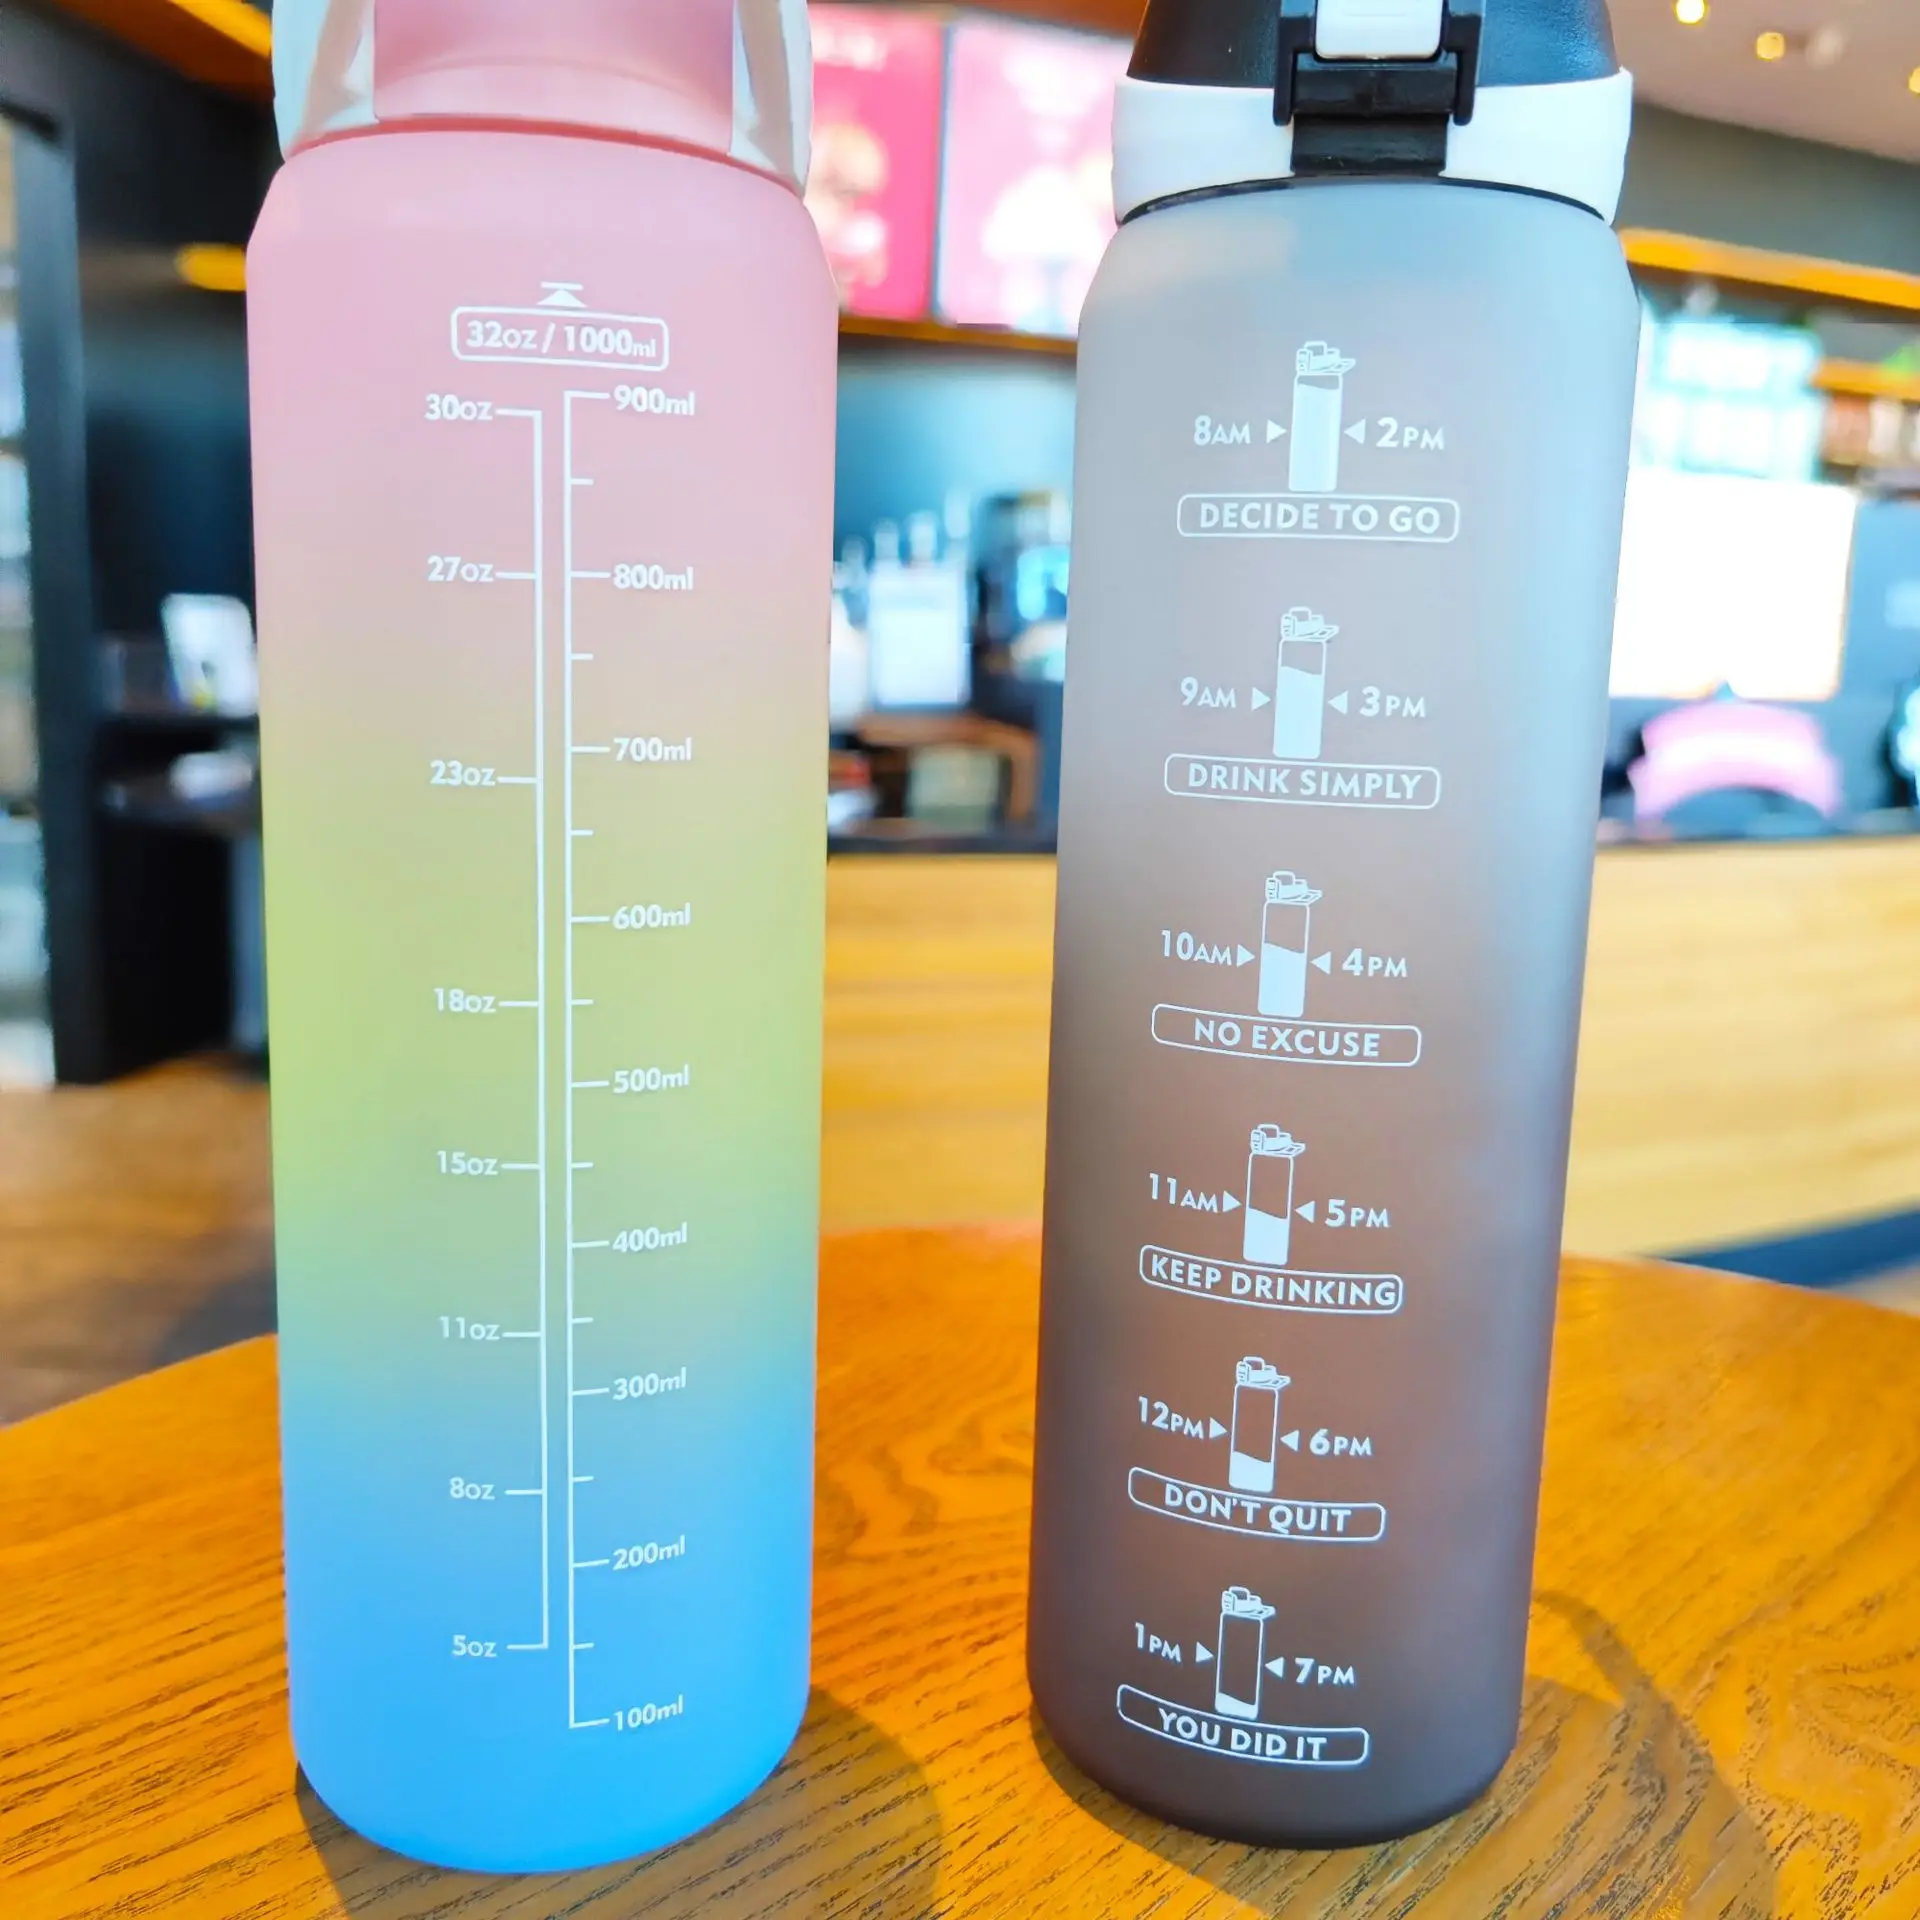 https://ae01.alicdn.com/kf/Sd32f8554f06243259f657b19c37cdb13e/1000ML-Water-Bottle-Portable-Colorful-Sports-Bottle-with-Time-Leak-proof-Cups-for-Outdoor-Fitness-Gym.jpg